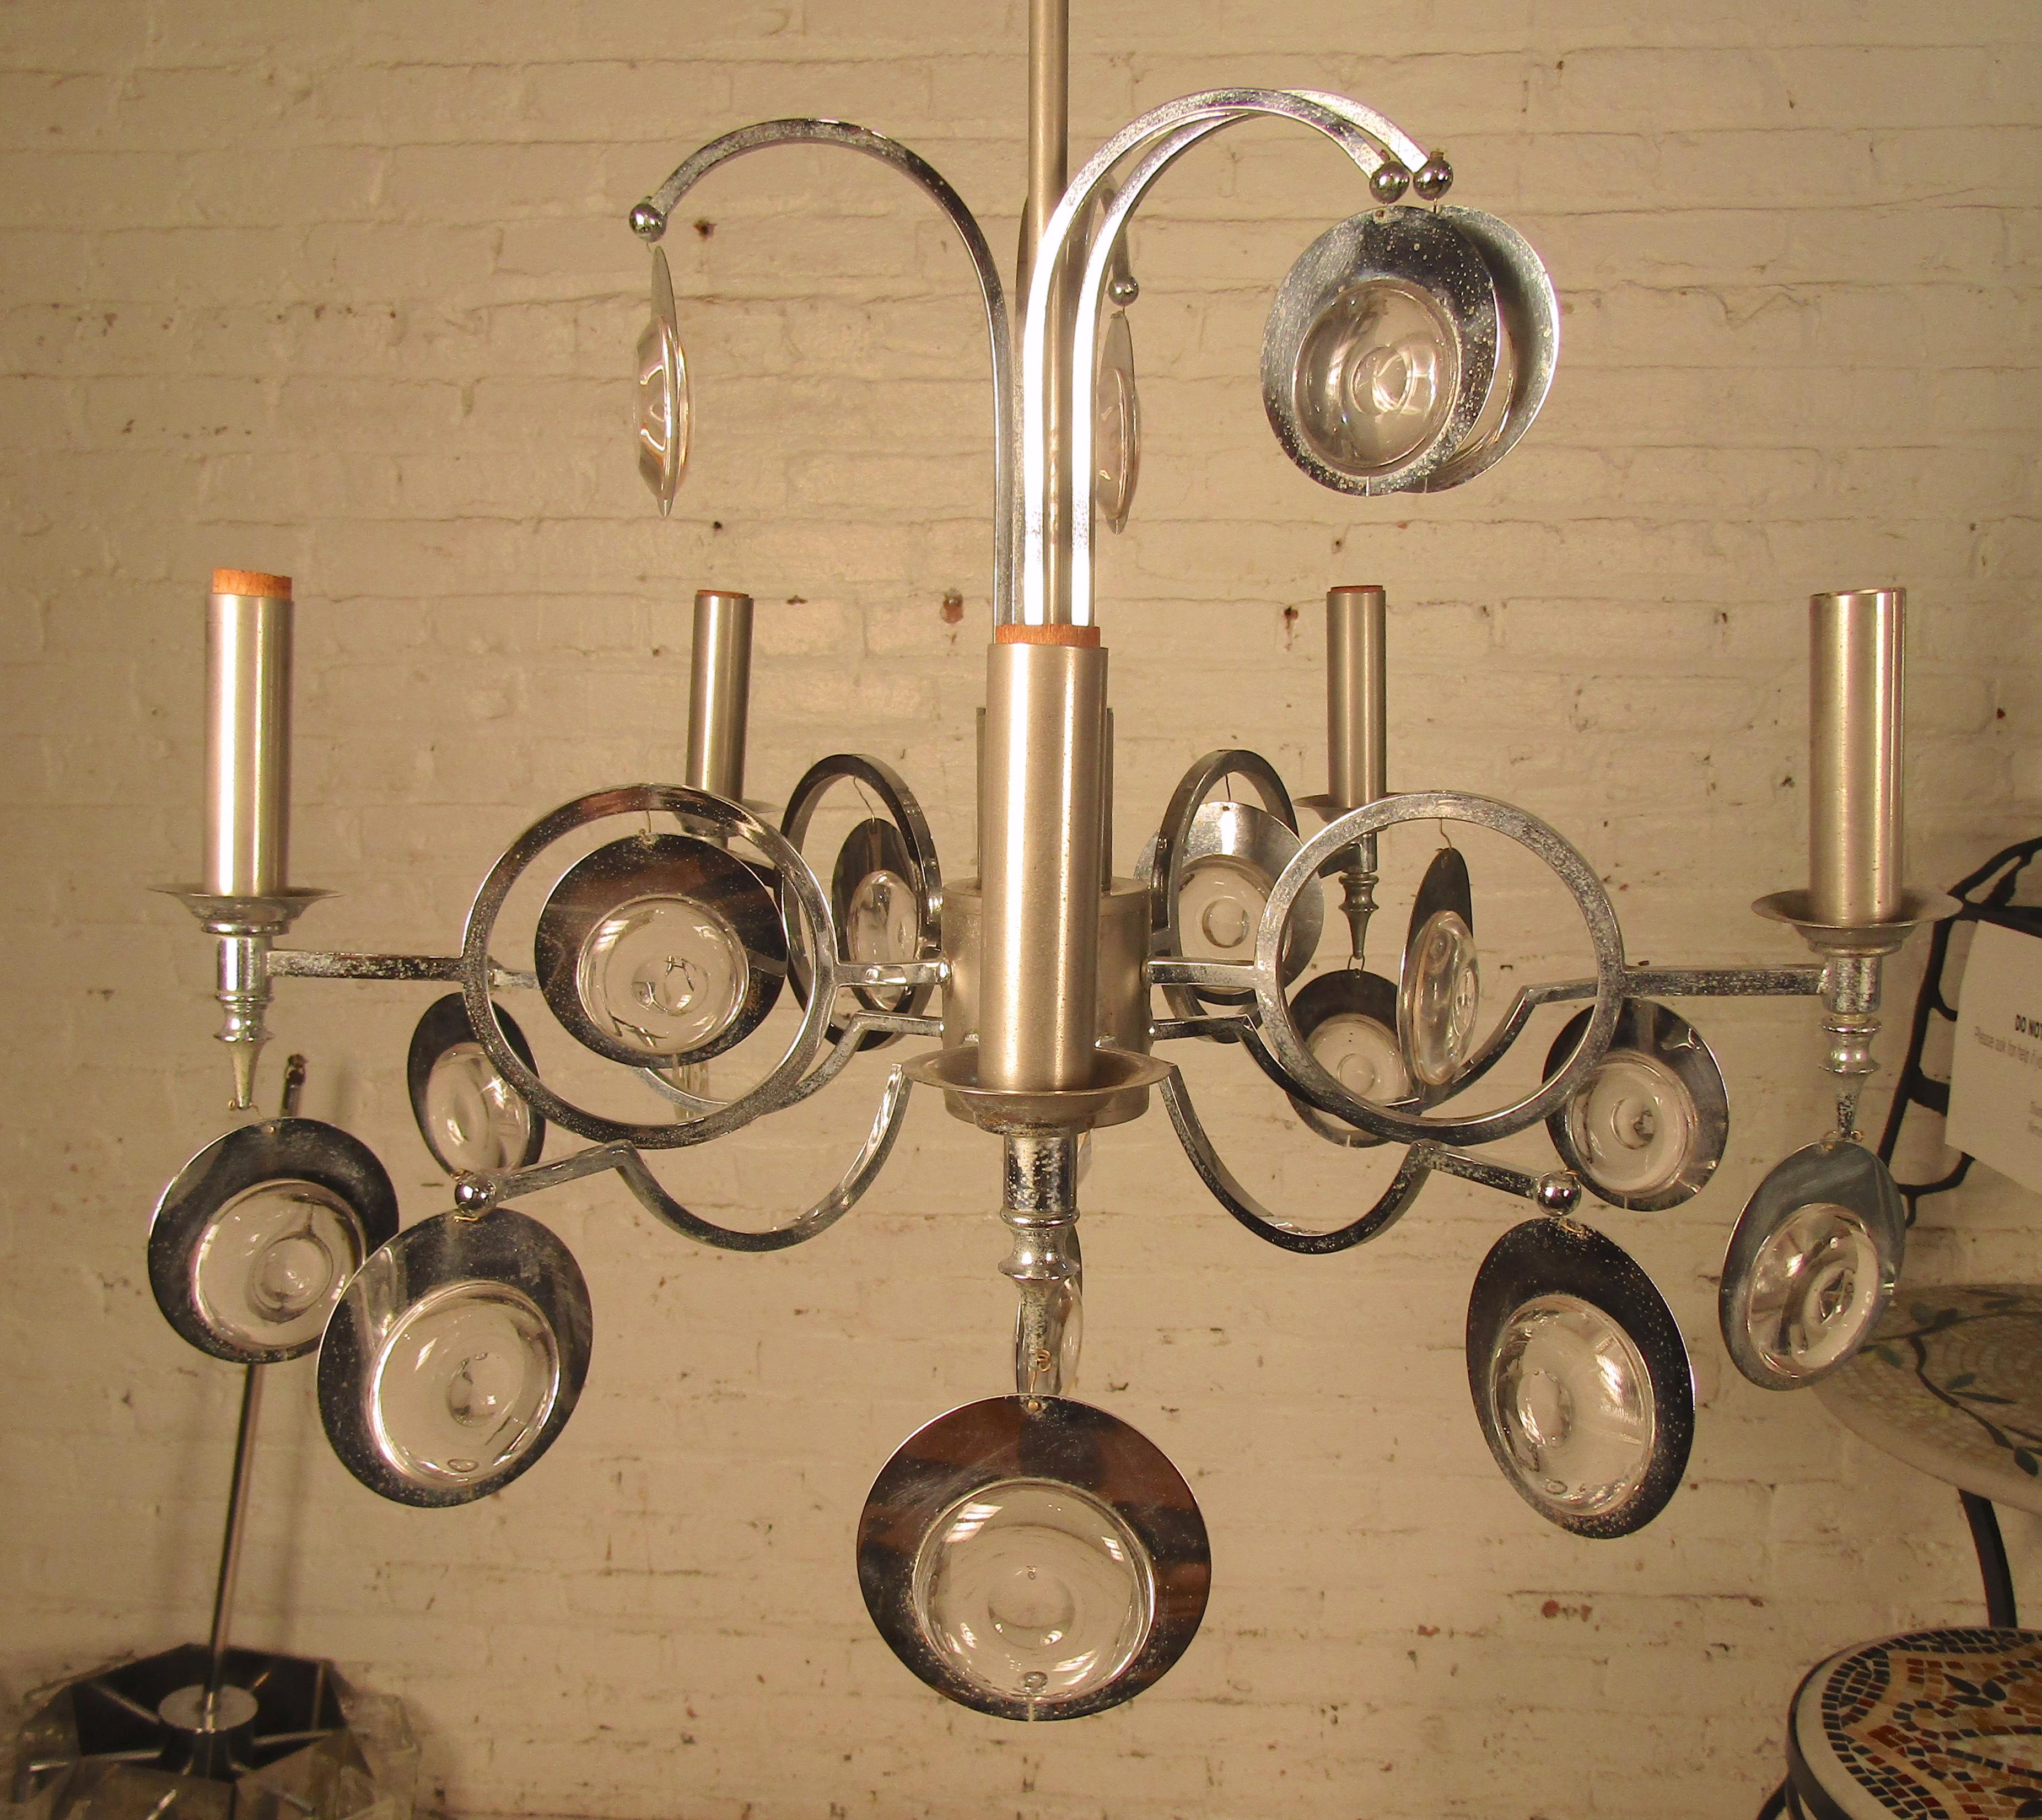 Candelabra bulb chandelier with polished chrome and glass ornaments.
(Please confirm item location - NY or NJ - with dealer).
  